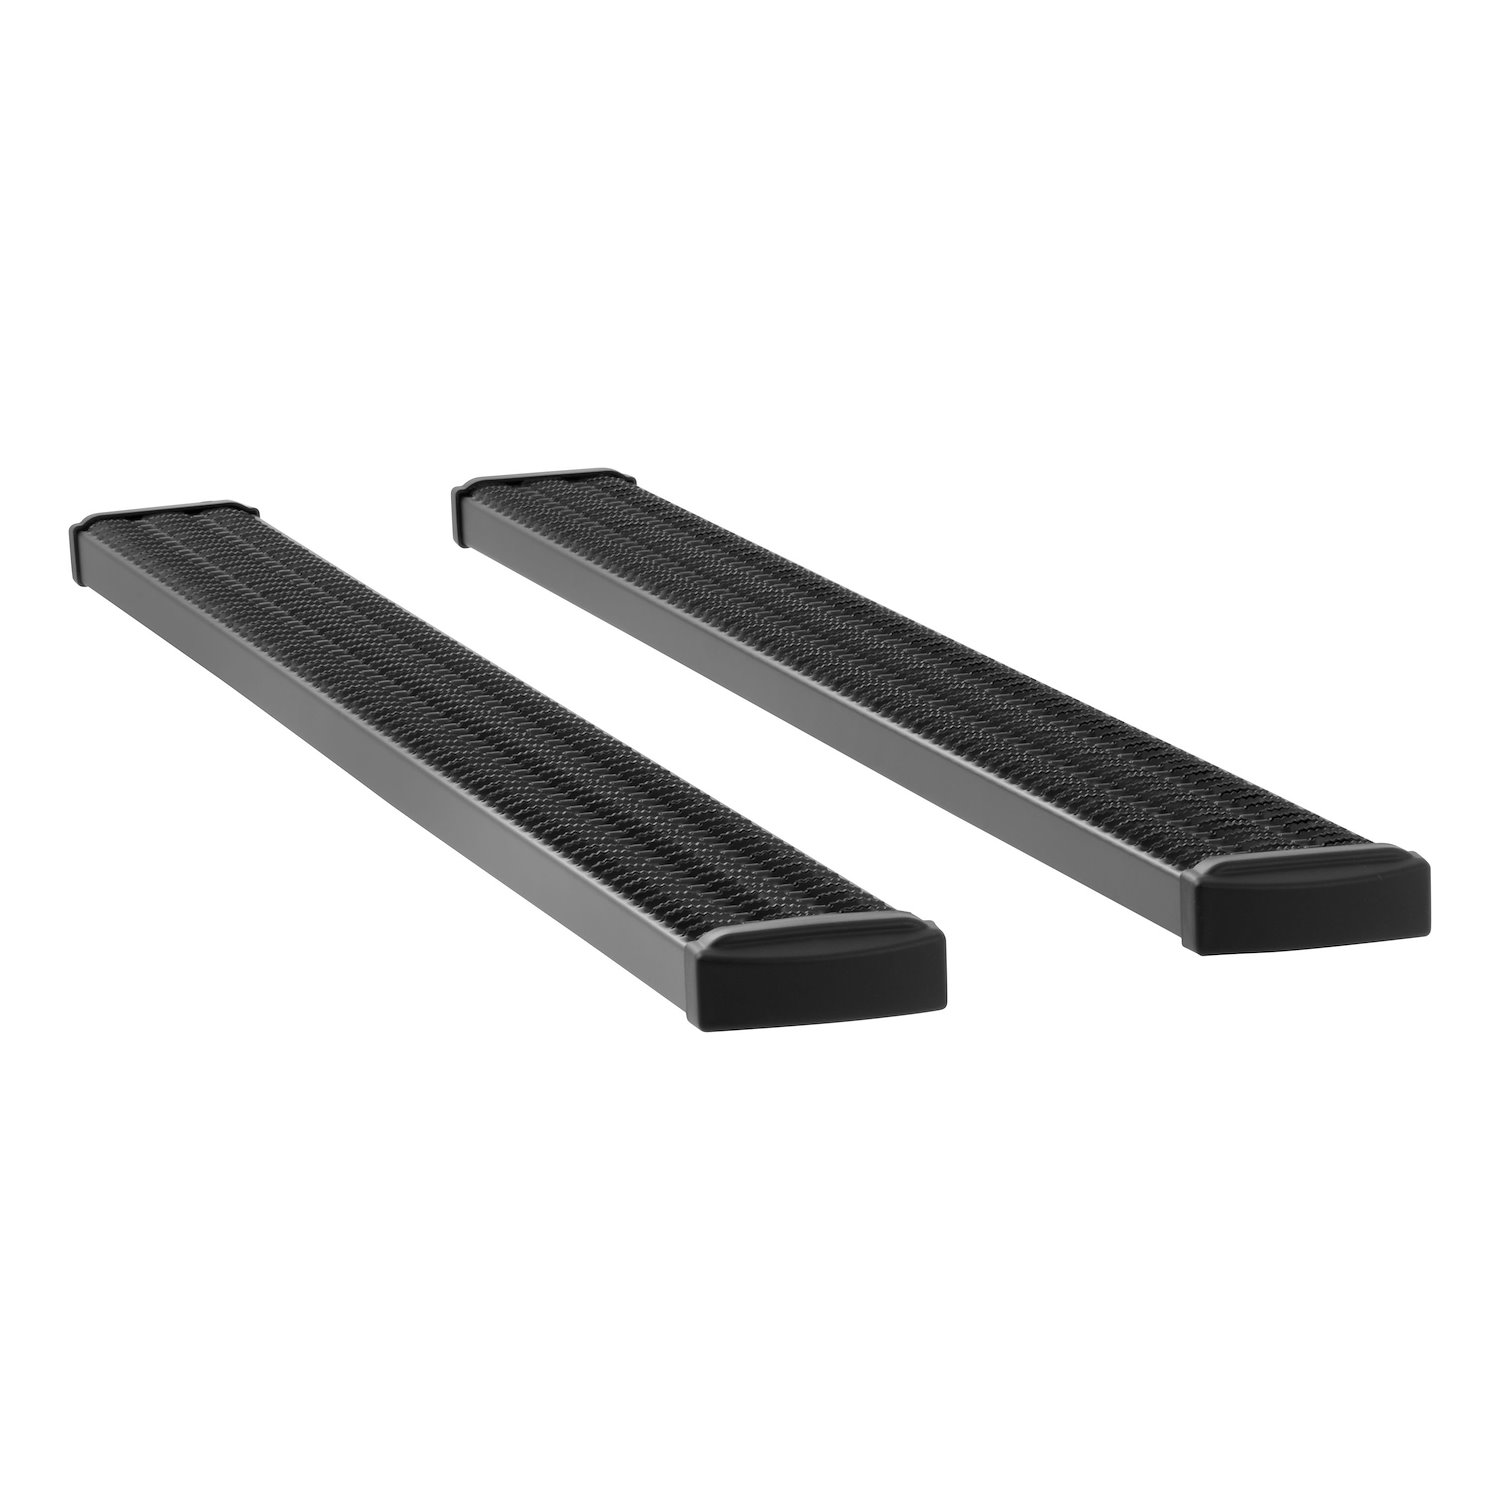 415088-401443 Grip Step 7 in. x 88 in. Black Aluminum Running Boards Fits Select Chevrolet, GMC